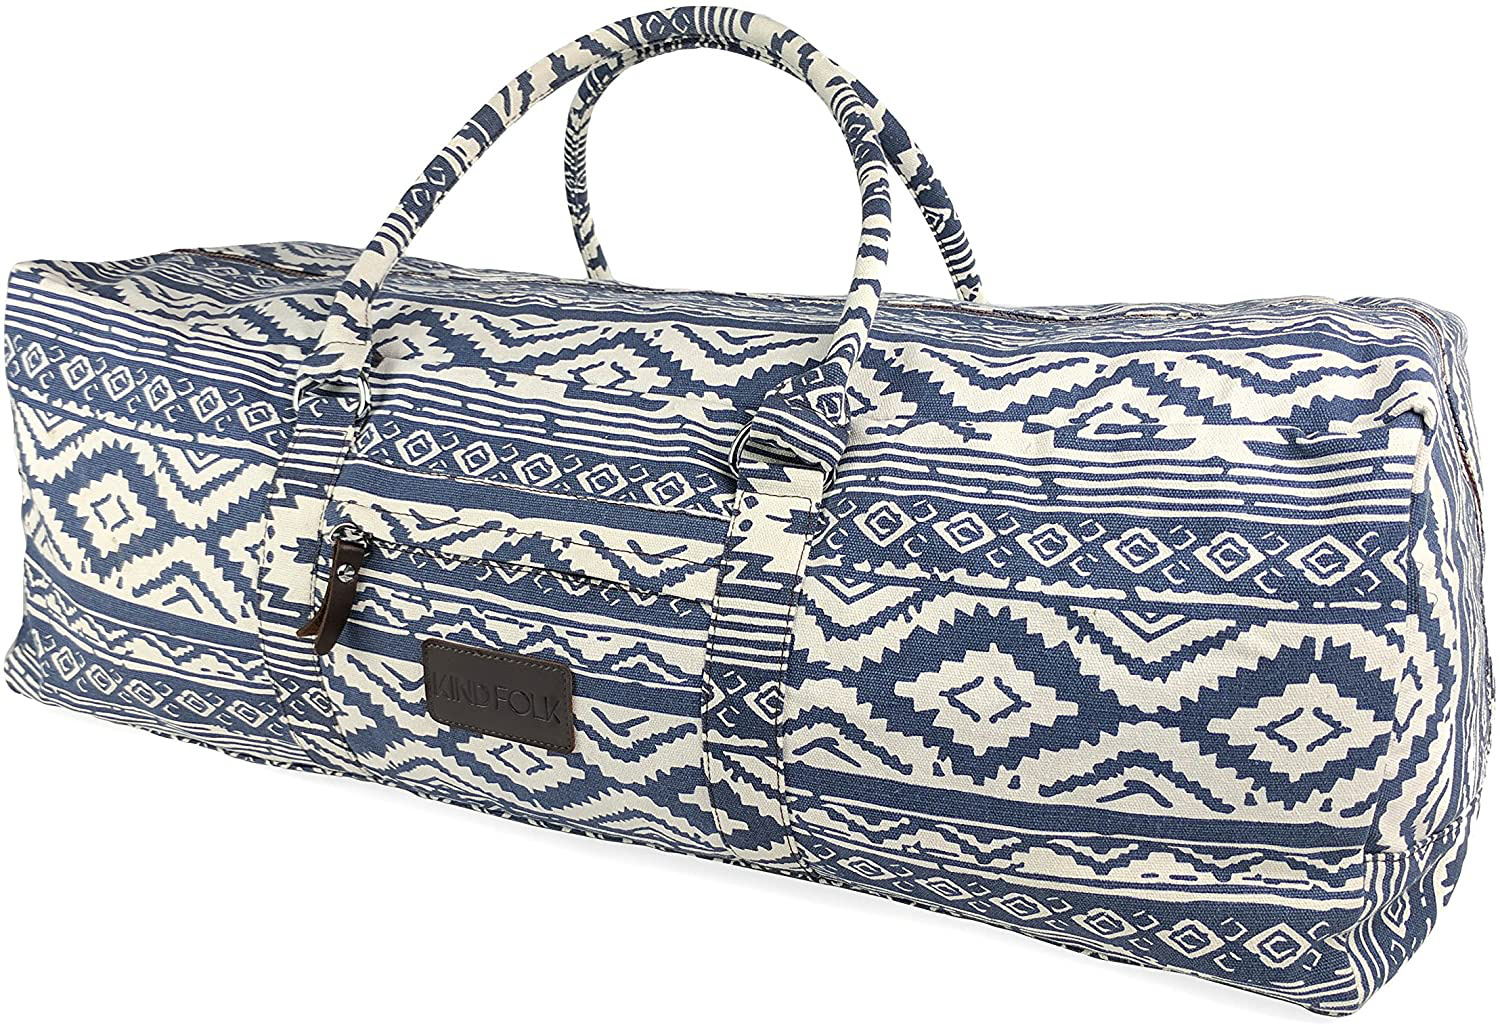 Kindfolk Yoga Mat Xl Duffel Bag Extra Large Patterned Canvas With Pocket And Zip